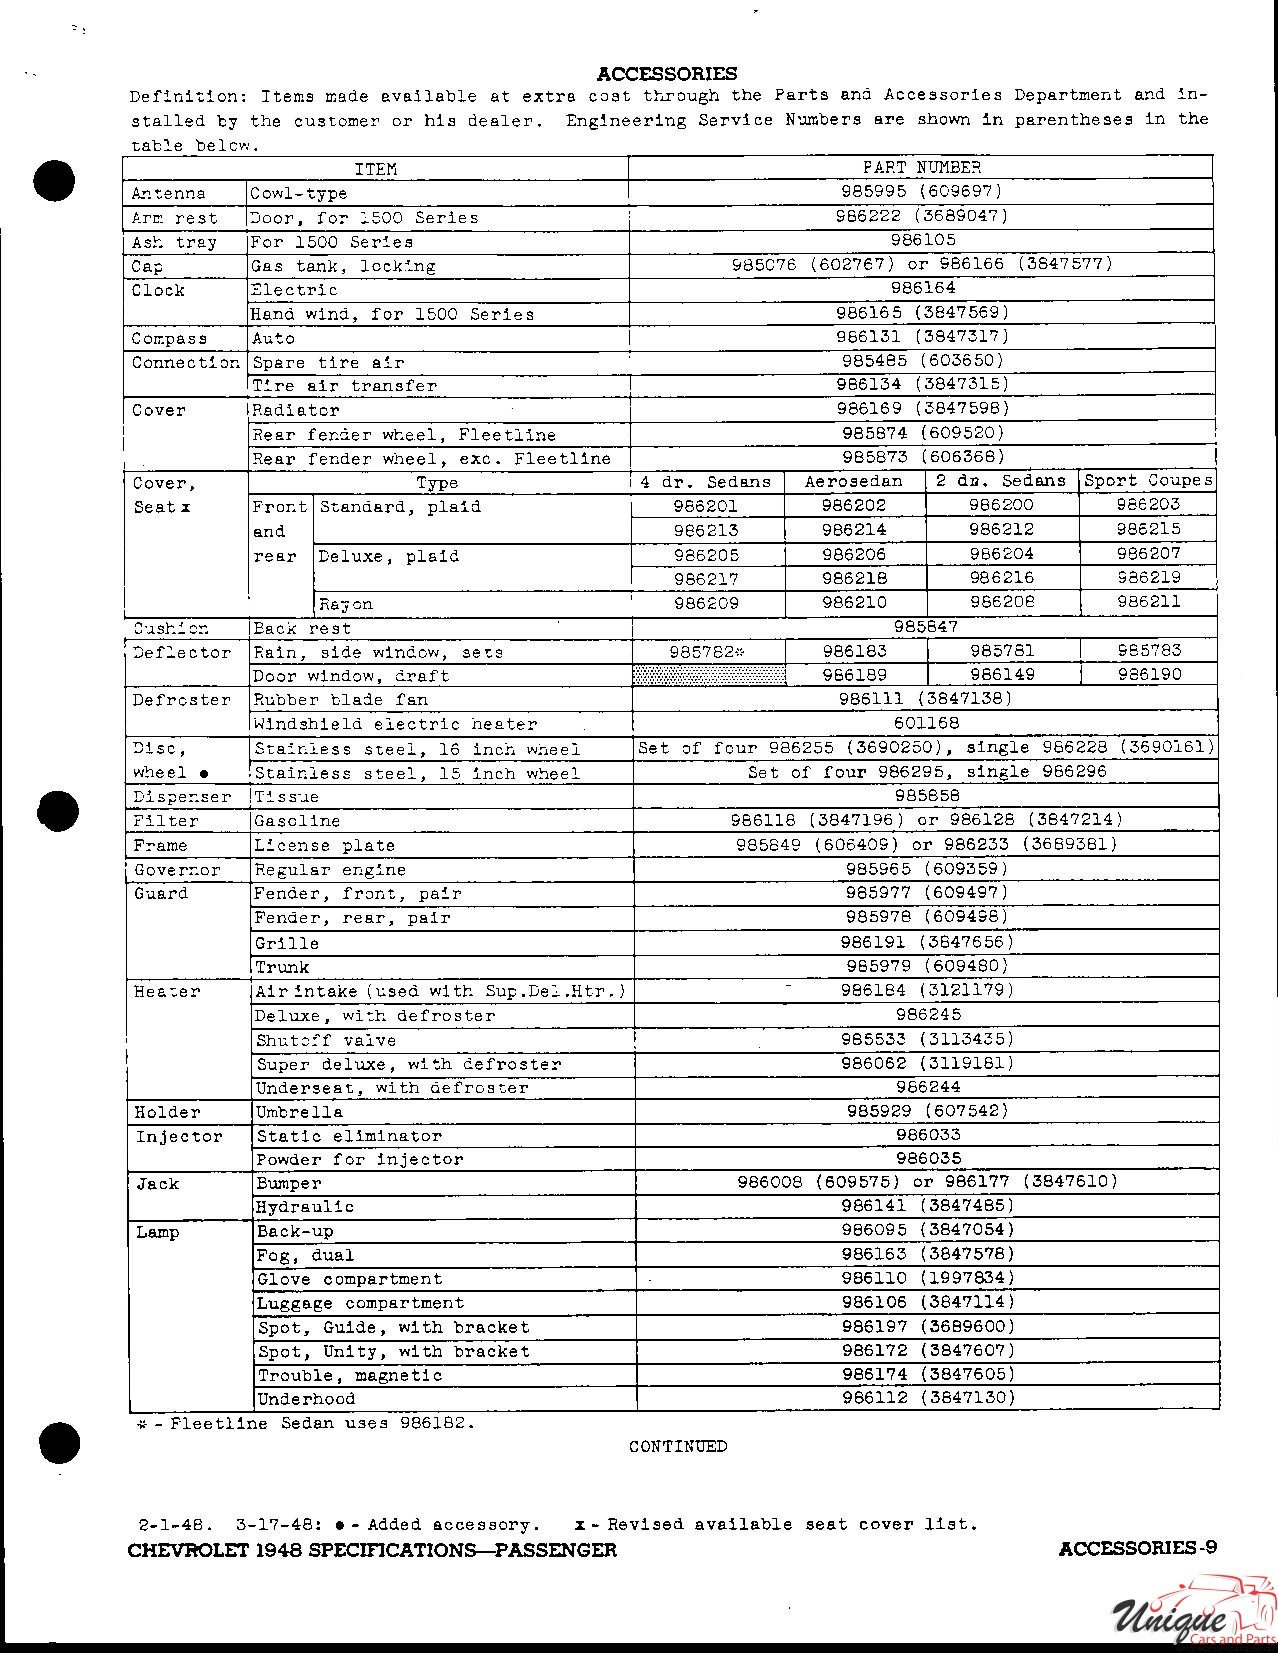 1948 Chevrolet Specifications Page 9